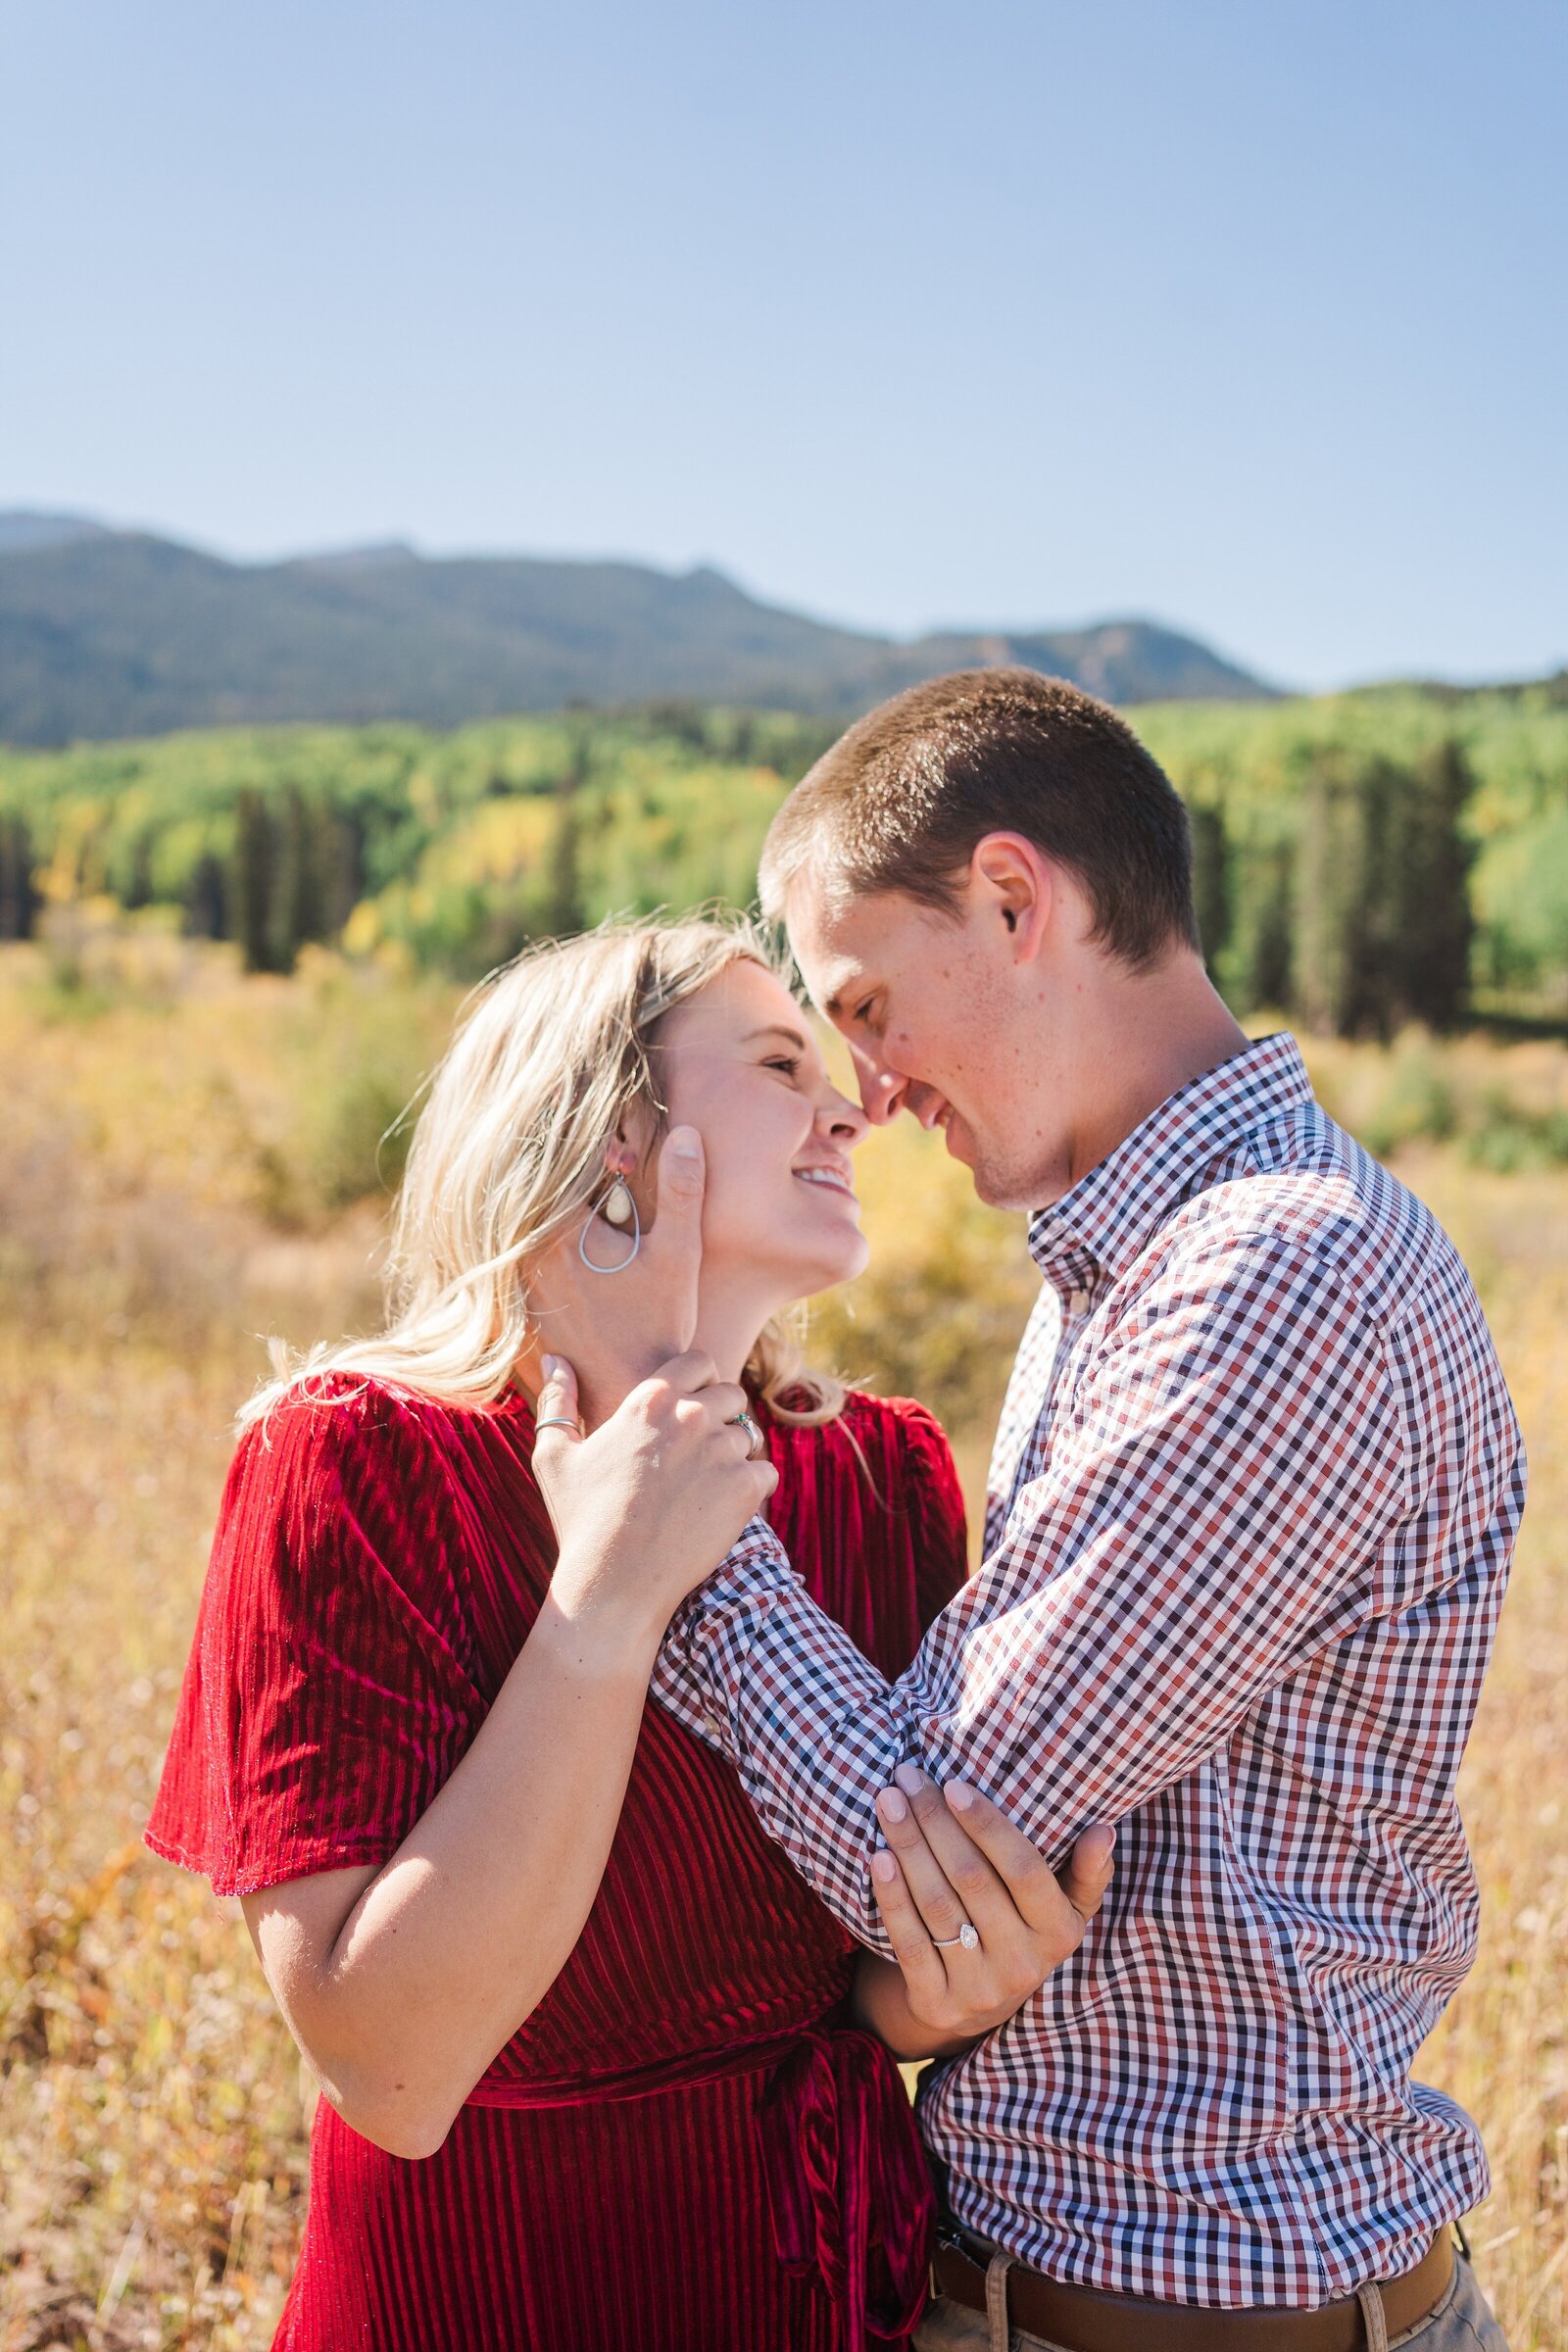 Adventure Elopement Photography in Colorado" - Experience the thrill and beauty of an adventurous elopement with stunning photography to cherish forever.